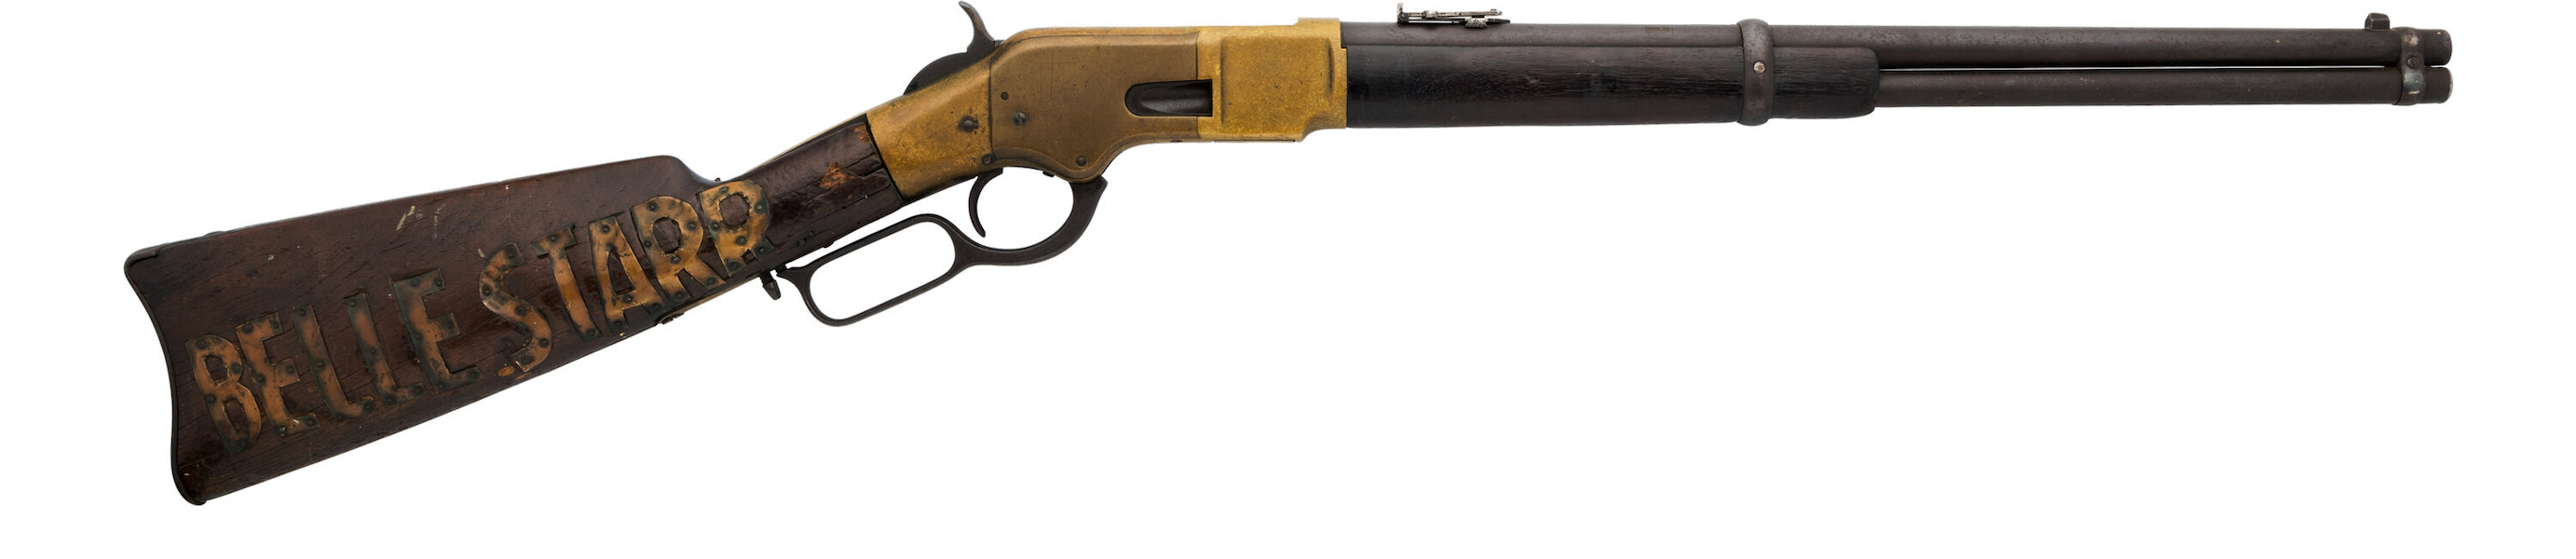 Winchester Model 1886 saddle ring carbine belonging to Belle Starr, estimated at $16,000-$24,000. Image courtesy of Heritage Auctions